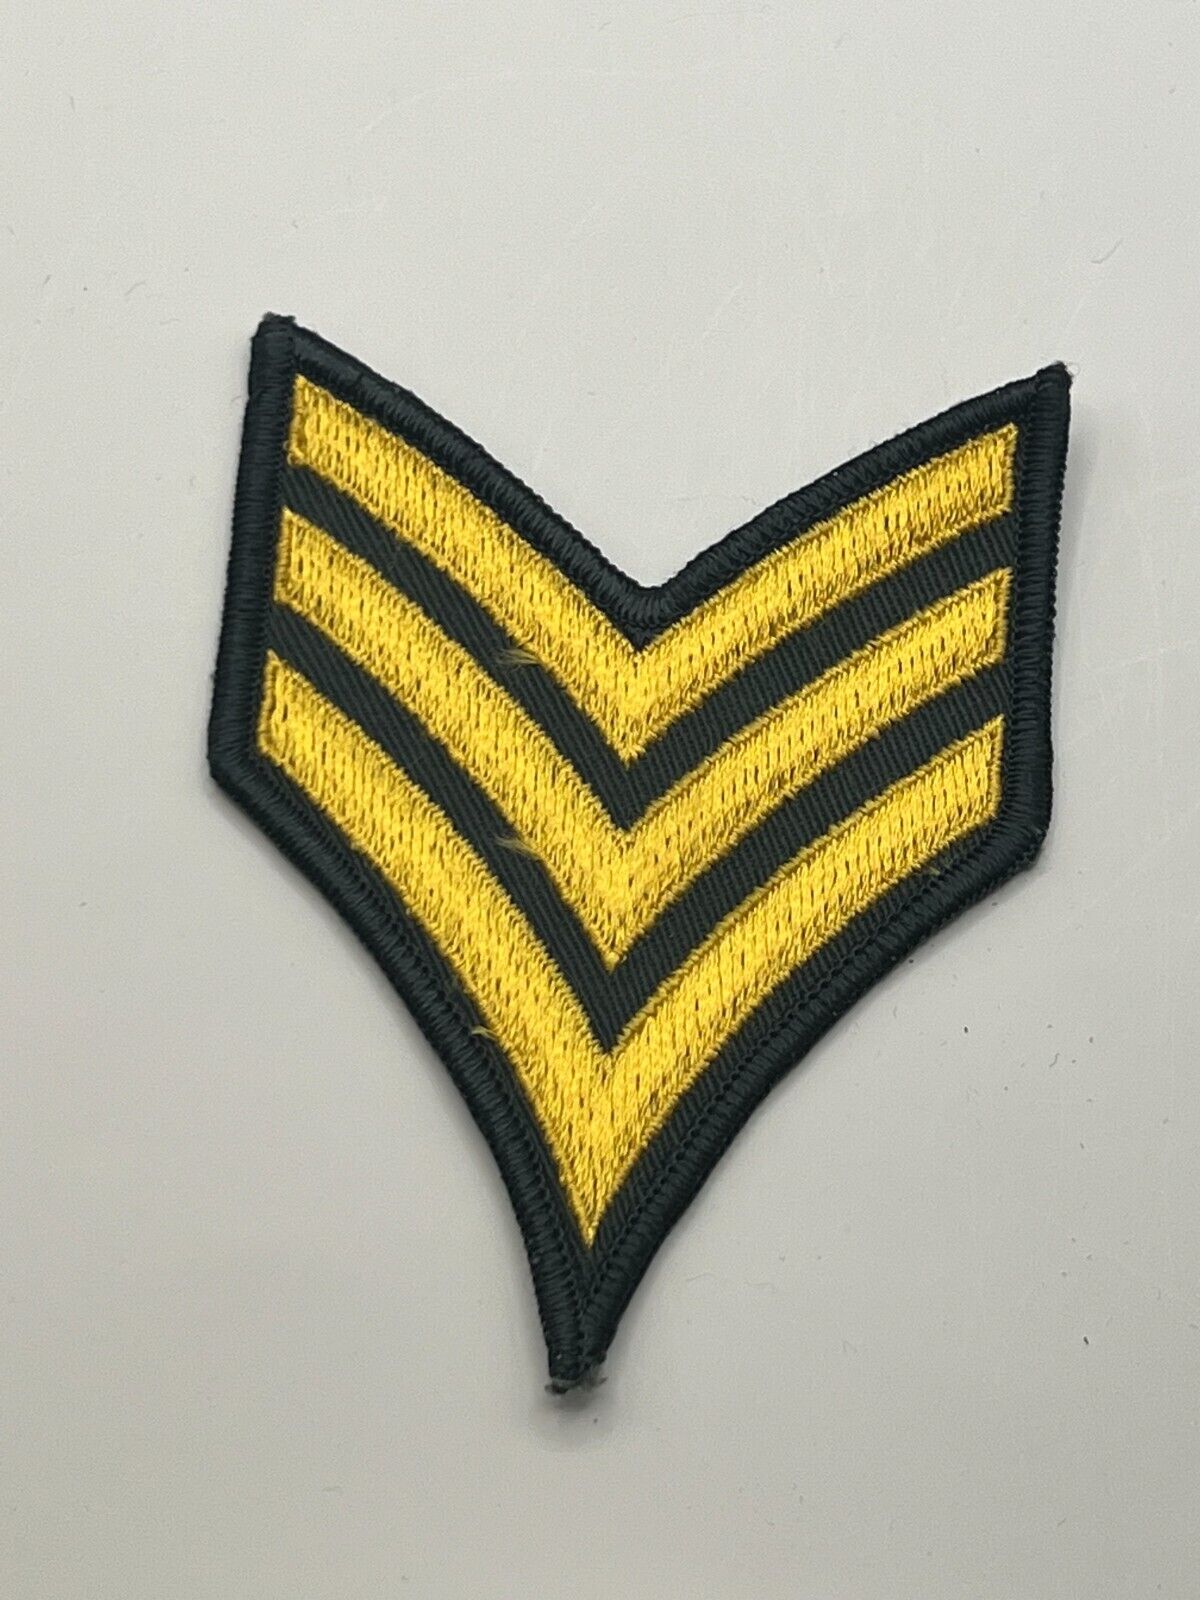 Military Army Chevron Sergeant 3 Gold Bar Embroidered Black Background.